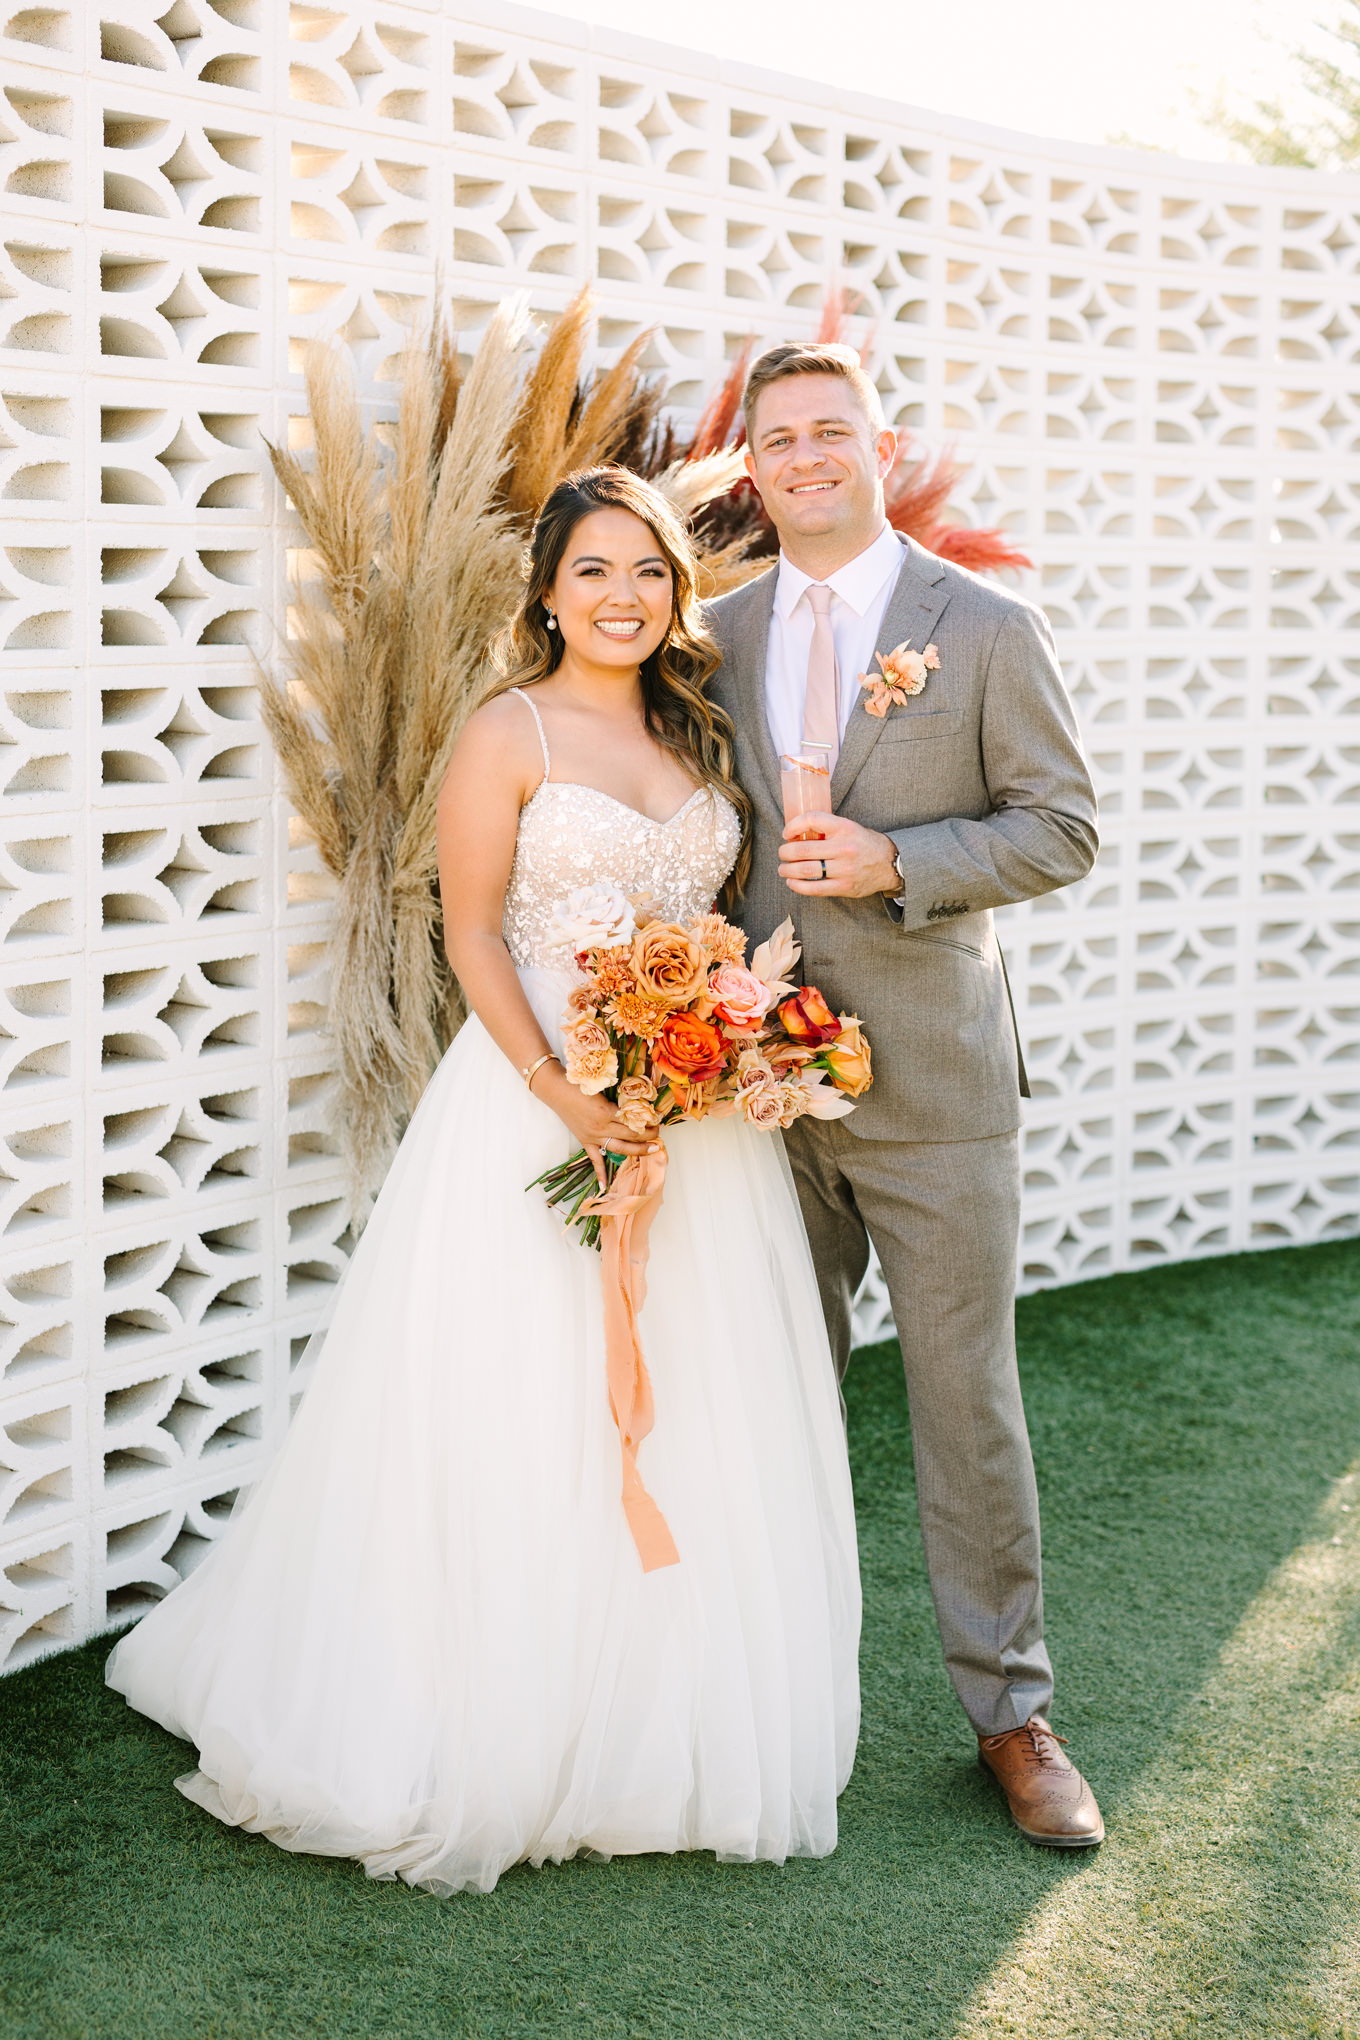 Bride and groom on white breeze block wall | Pink and orange Lautner Compound wedding | Colorful Palm Springs wedding photography | #palmspringsphotographer #palmspringswedding #lautnercompound #southerncaliforniawedding  Source: Mary Costa Photography | Los Angeles